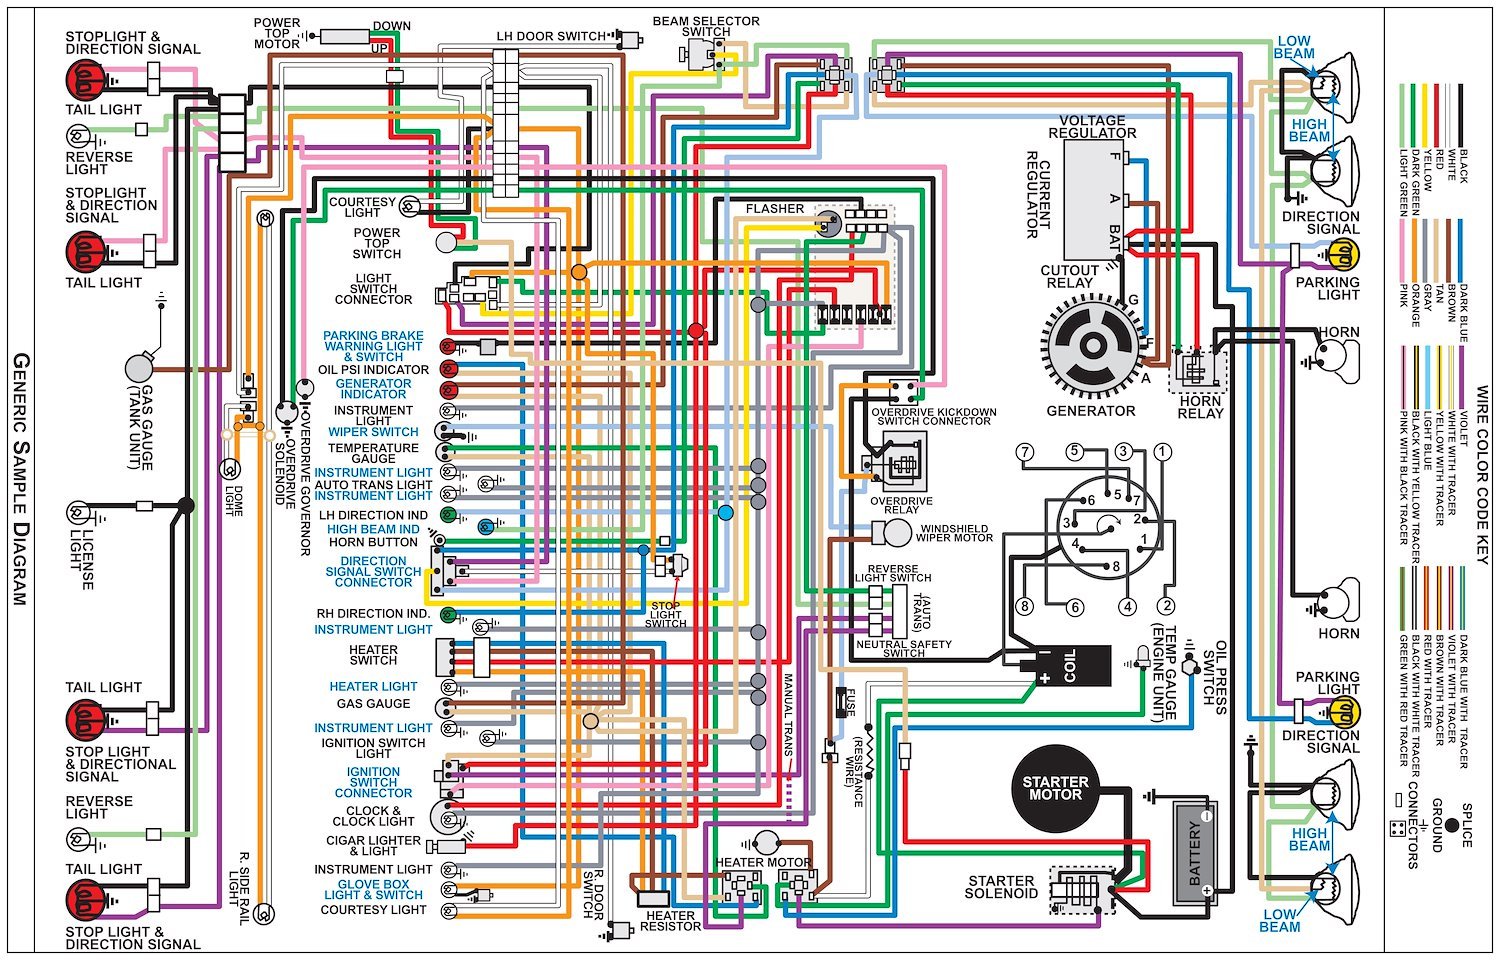 Wiring Diagram for 1969 Ford Mustang, 11 in x 17 in., Laminated